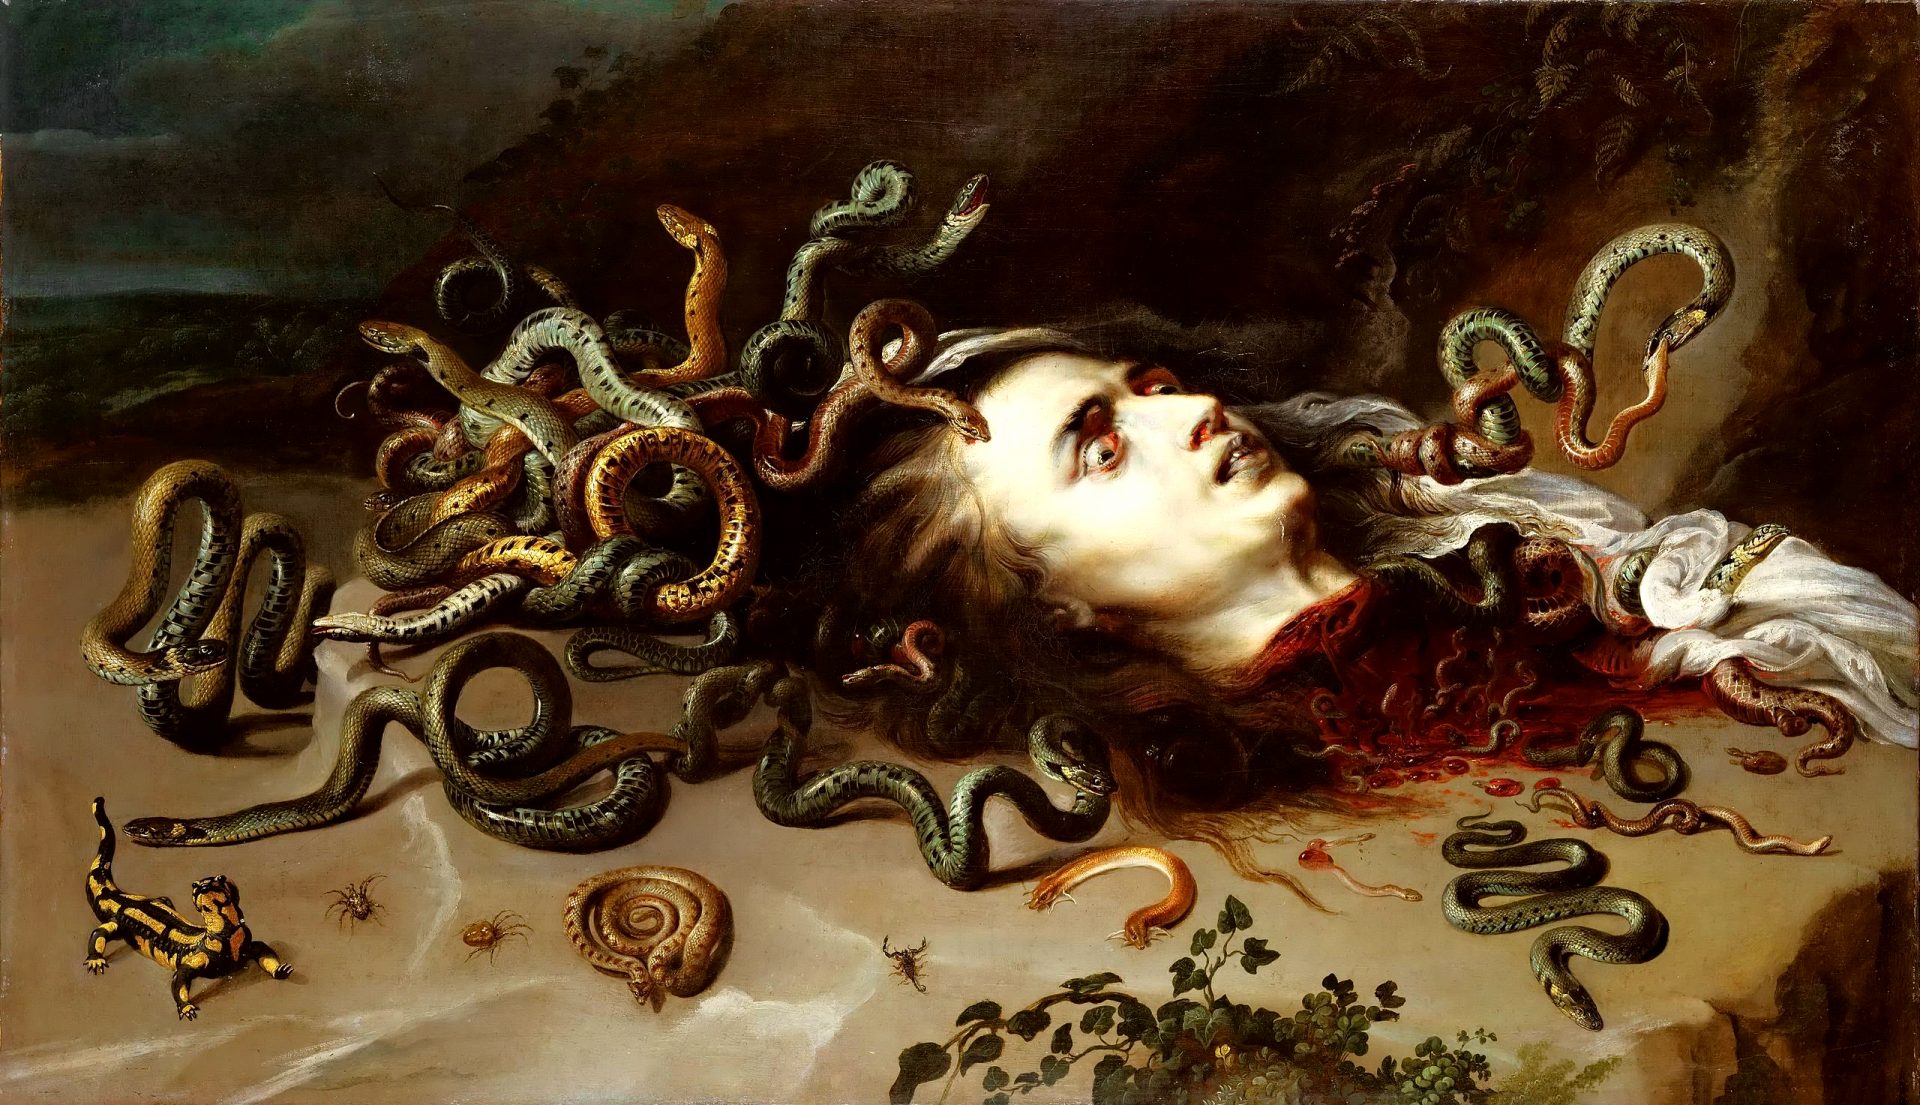 A painting of a woman’s head that has been cut off and lies on a rock. The woman’s hair is made of snakes that are alive and moving. The snakes are different colors and some of them are biting each other. The woman’s face is pale and twisted in fear and pain. Her eyes and mouth are open wide and blood is dripping from her neck. The painting has a dark and blurry background with a greenish hue. The painting is inspired by a Greek myth about Medusa, a woman who was turned into a monster with snake hair by the goddess Athena. Anyone who looked at Medusa’s face would turn to stone. The hero Perseus killed Medusa by using a mirror to avoid her gaze and cut off her head. The painter, Peter Paul Rubens, collaborated with another artist, Frans Snyders, who painted the snakes.